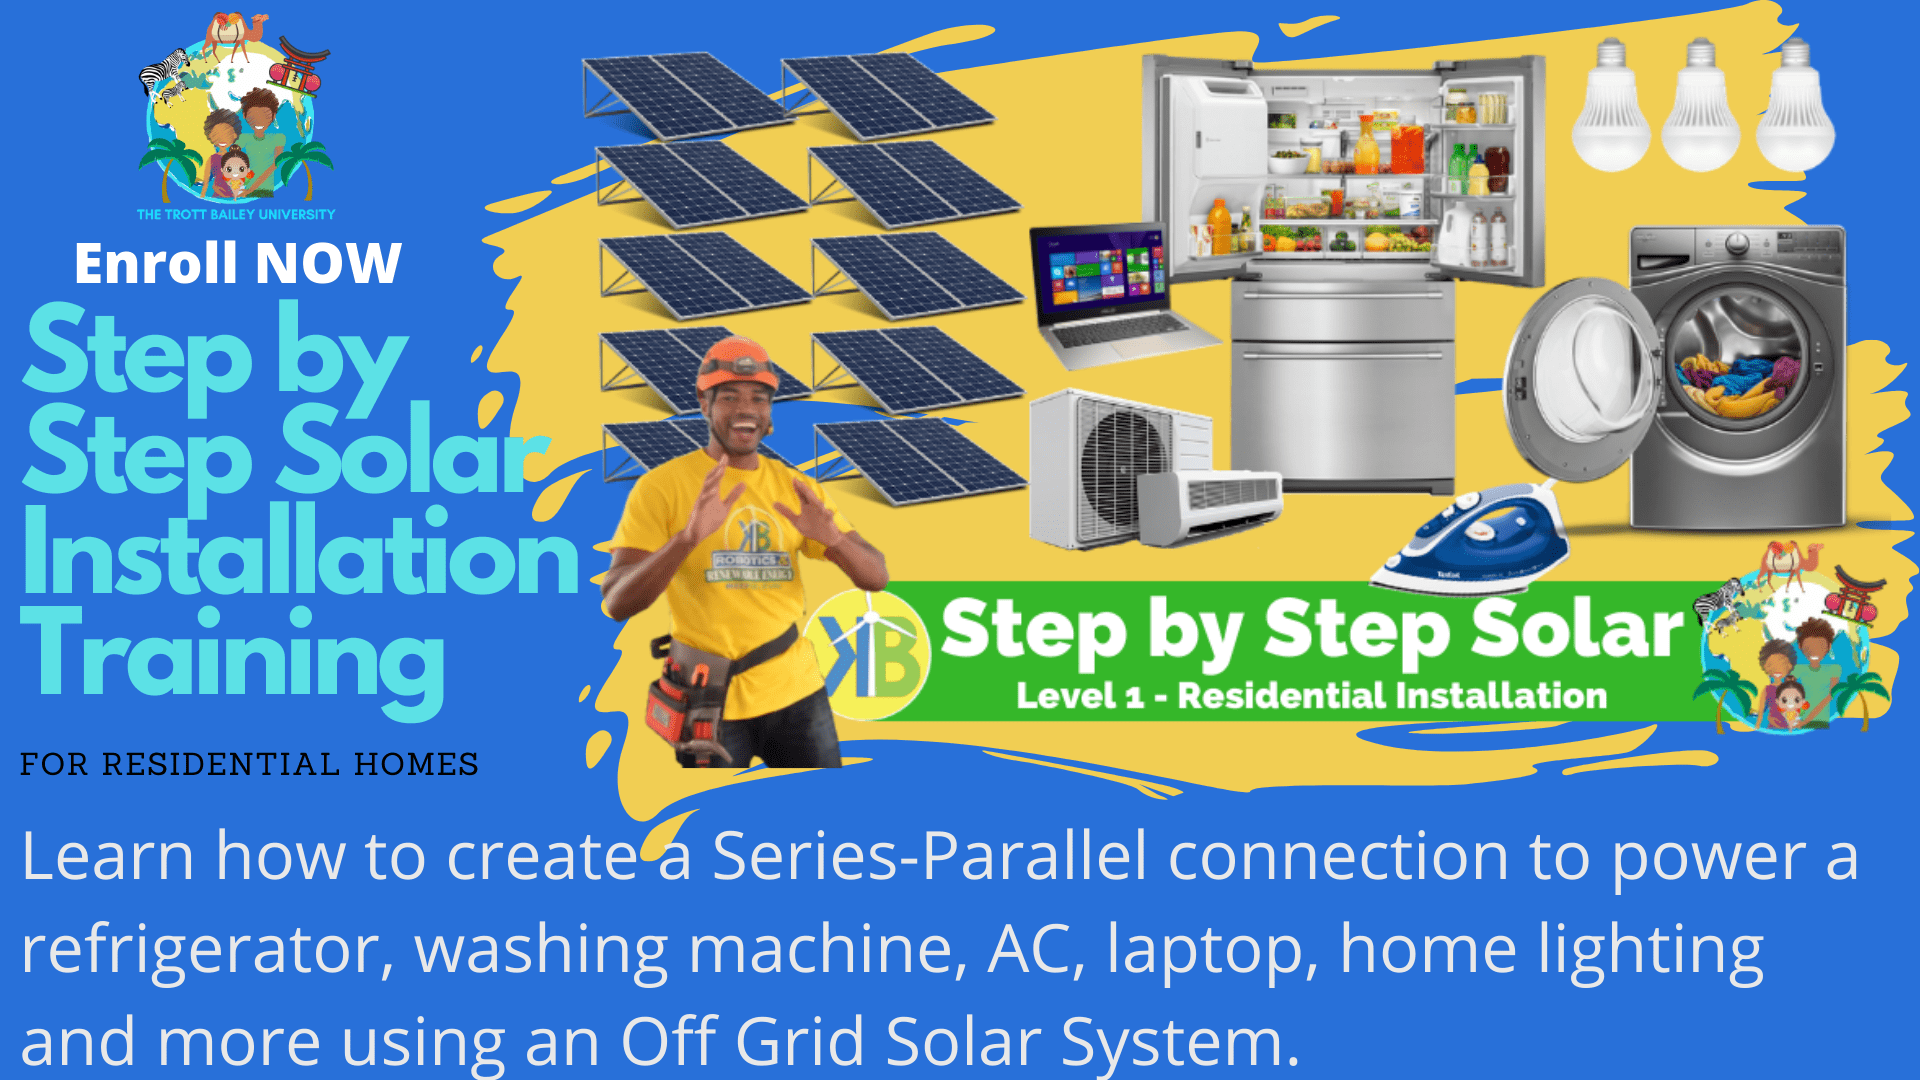 Register today for the Step by Step Solar Installation Training Course - step by step solar panel connection guide series or parallel connection by the trott bailey university